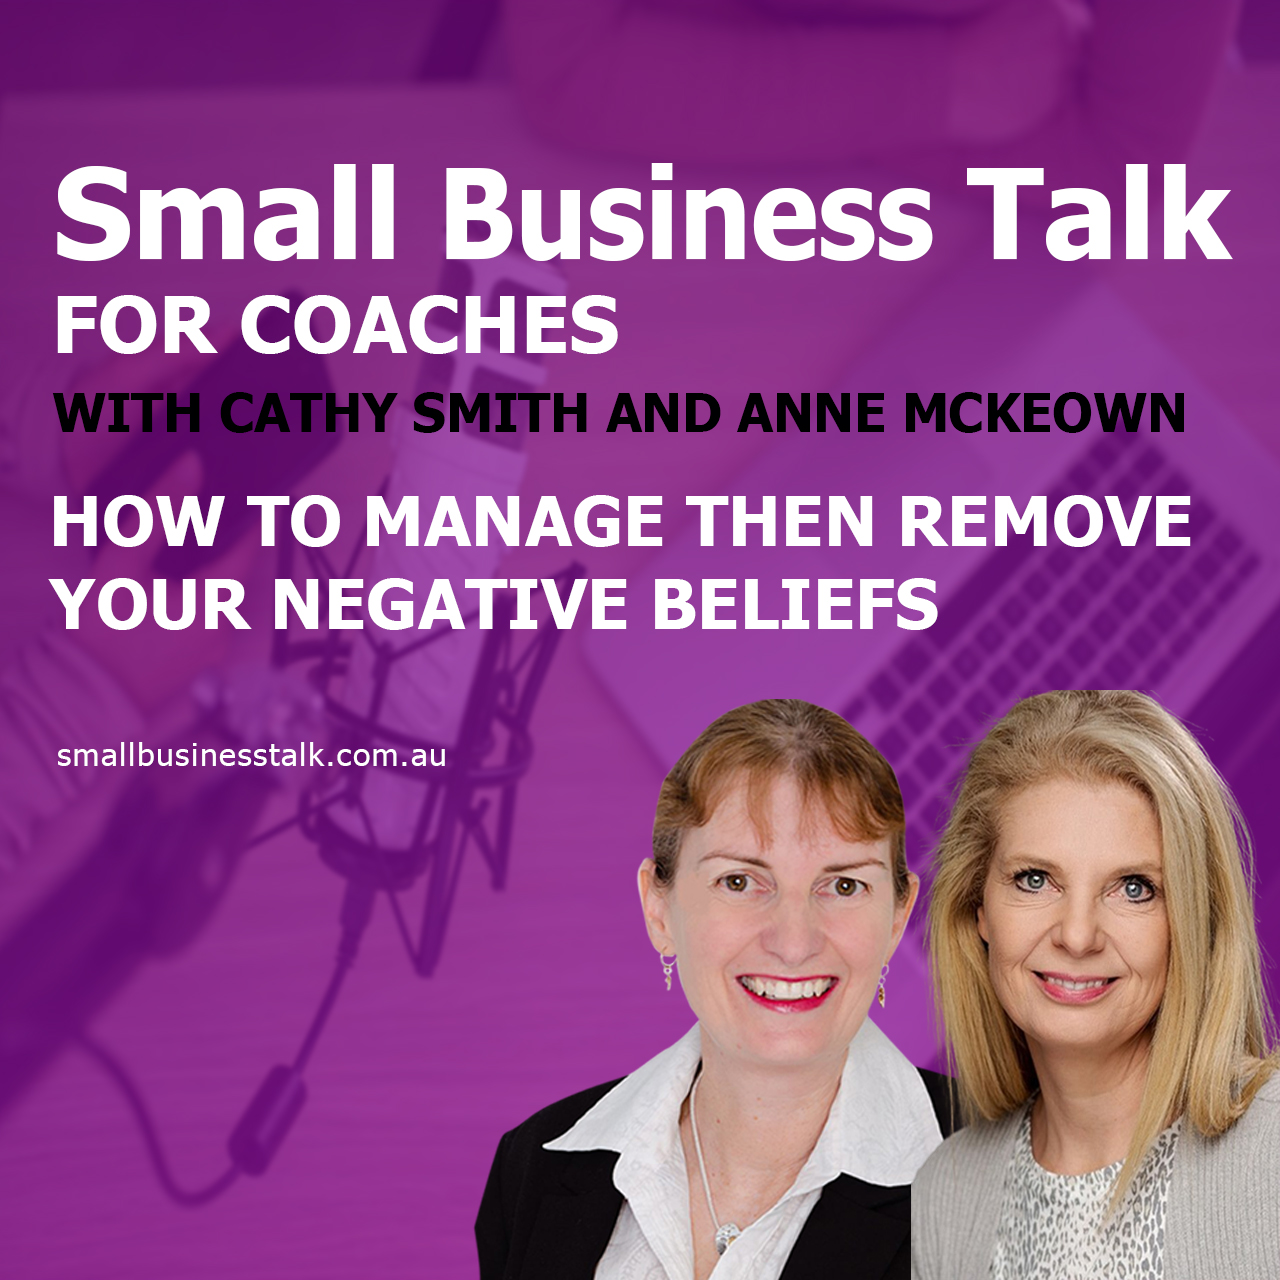 How to Manage then Remove Your Negative Beliefs with Cathy Smith and Anne McKeown